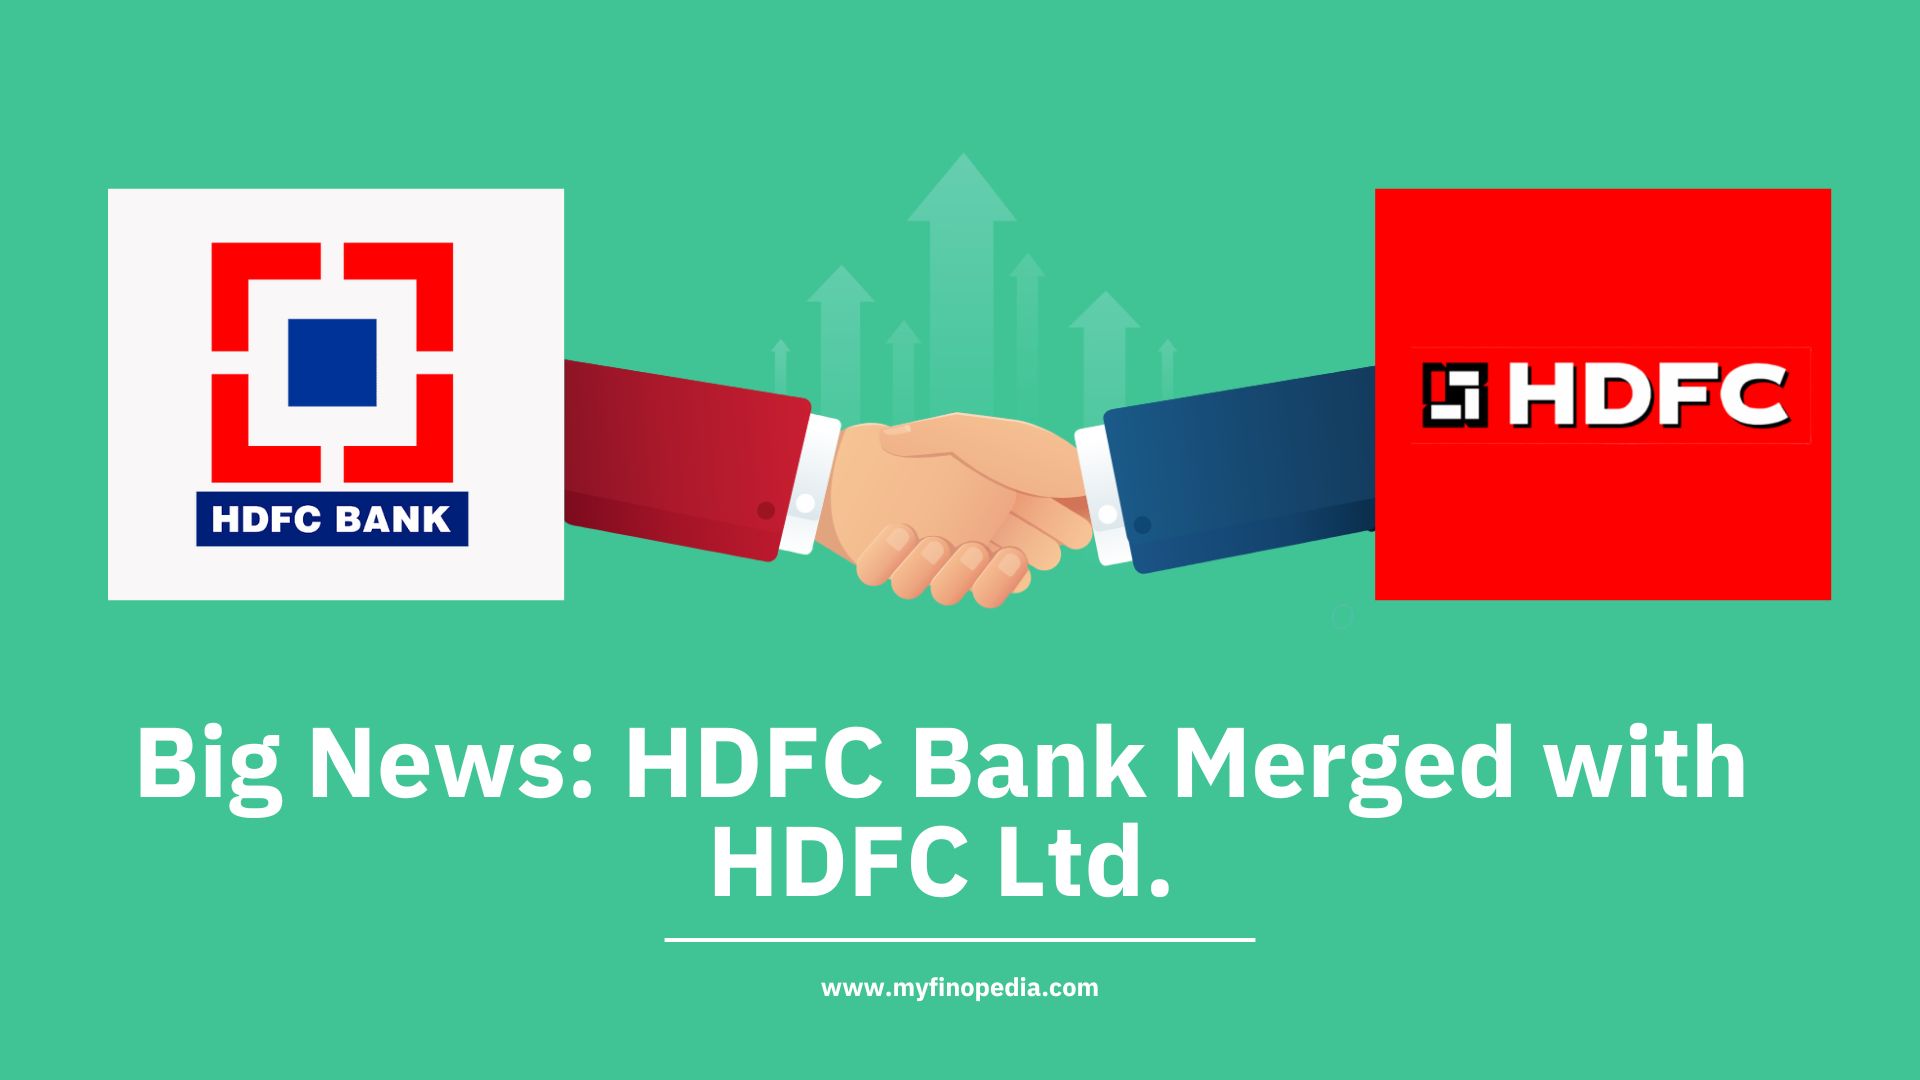 Big News Hdfc Bank Merged With Hdfc Ltd And Becomes 4th Largest Lender In The World 5834